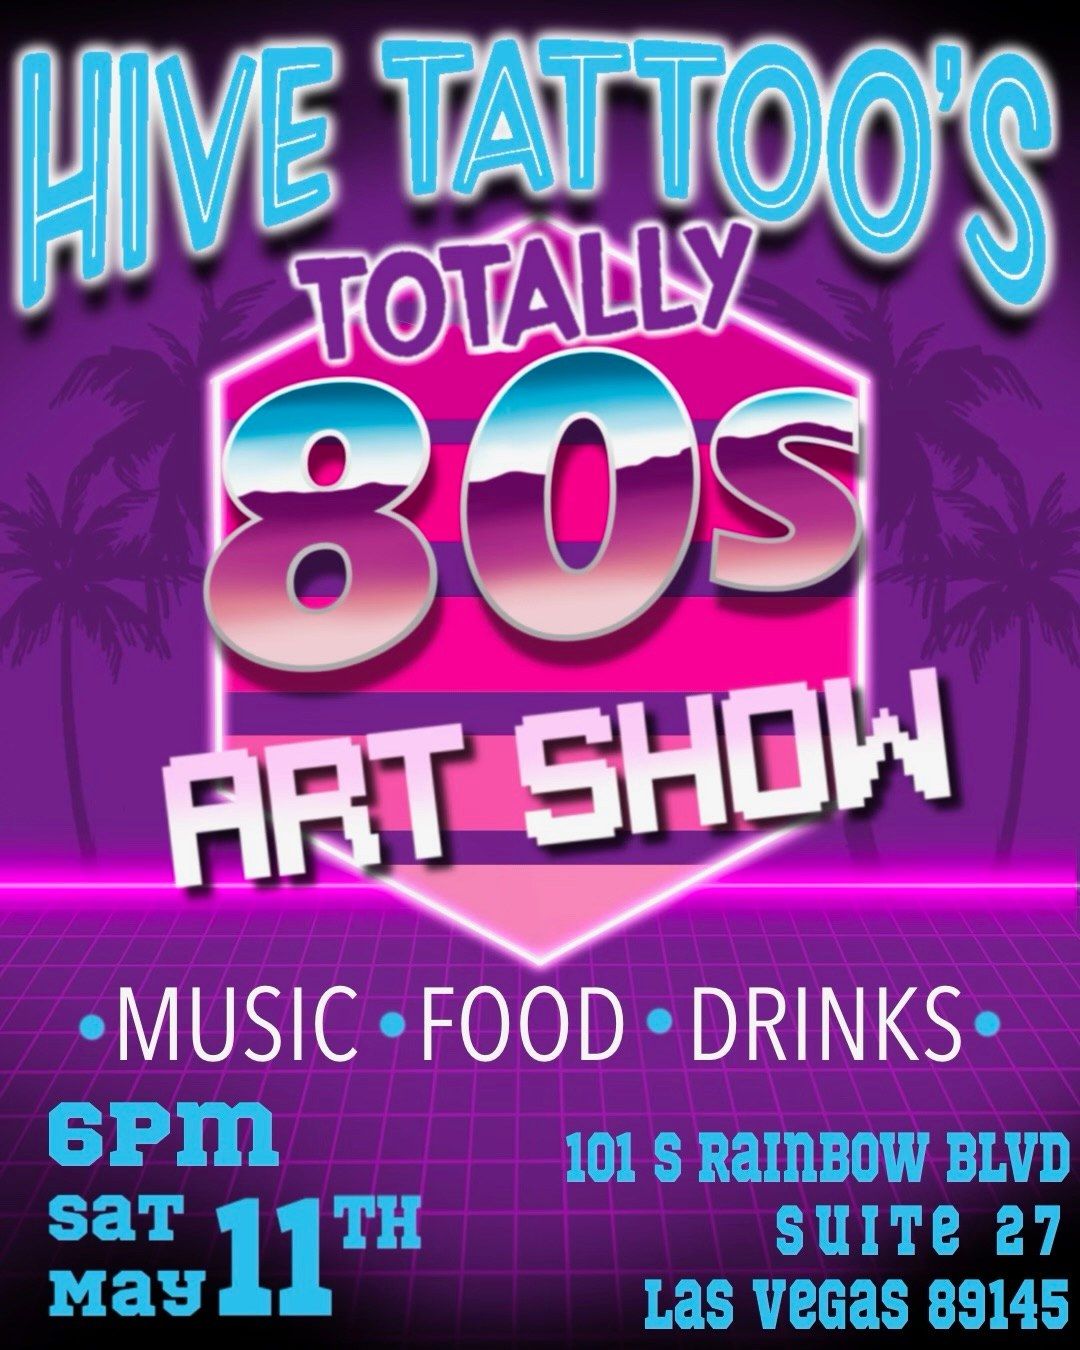 3rd Anniversary Party - Totally 80's Art Show\/Party